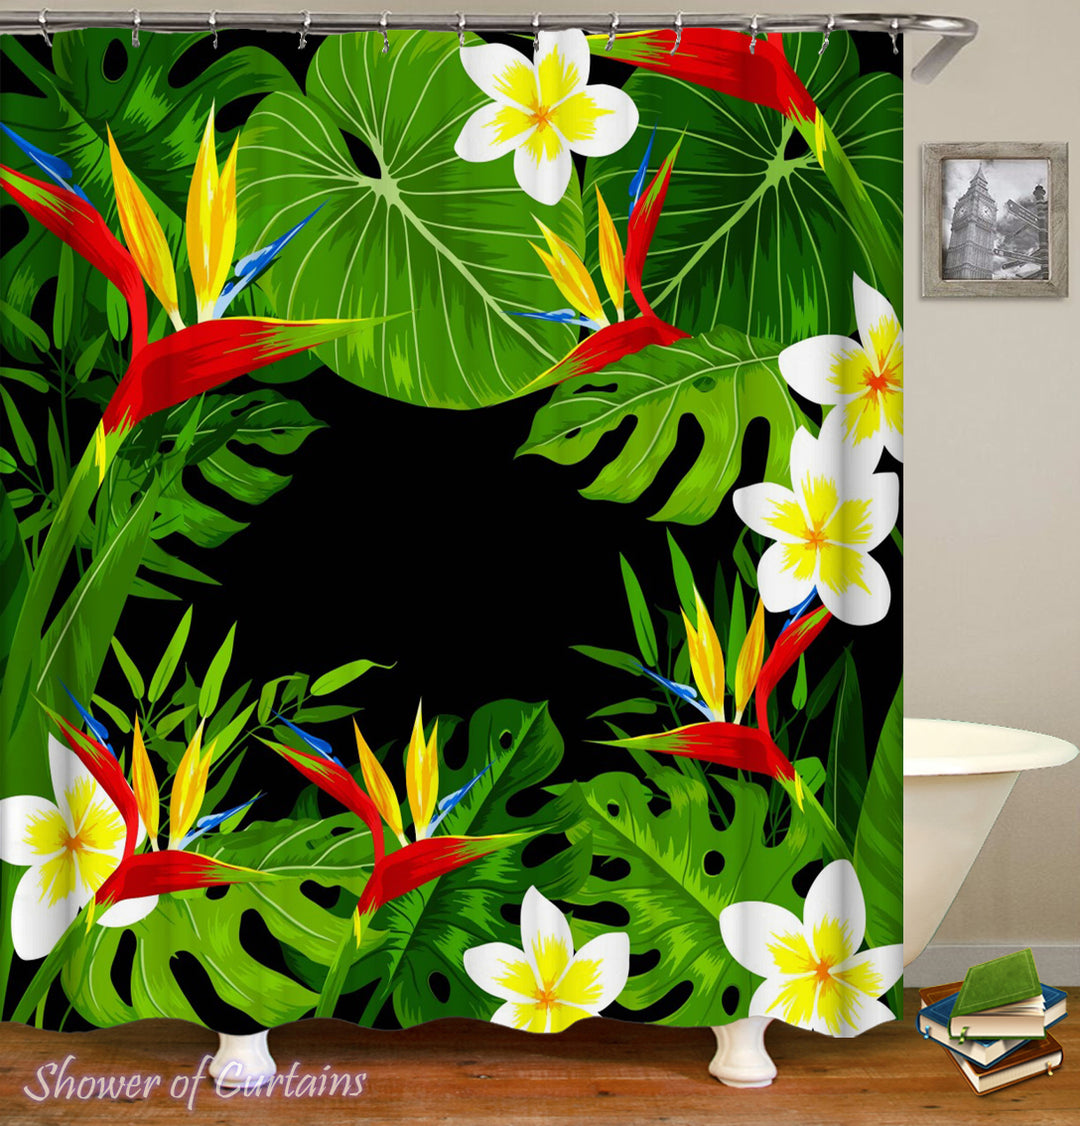 Tropical Shower Curtains - Tropical Flowers And Leaves